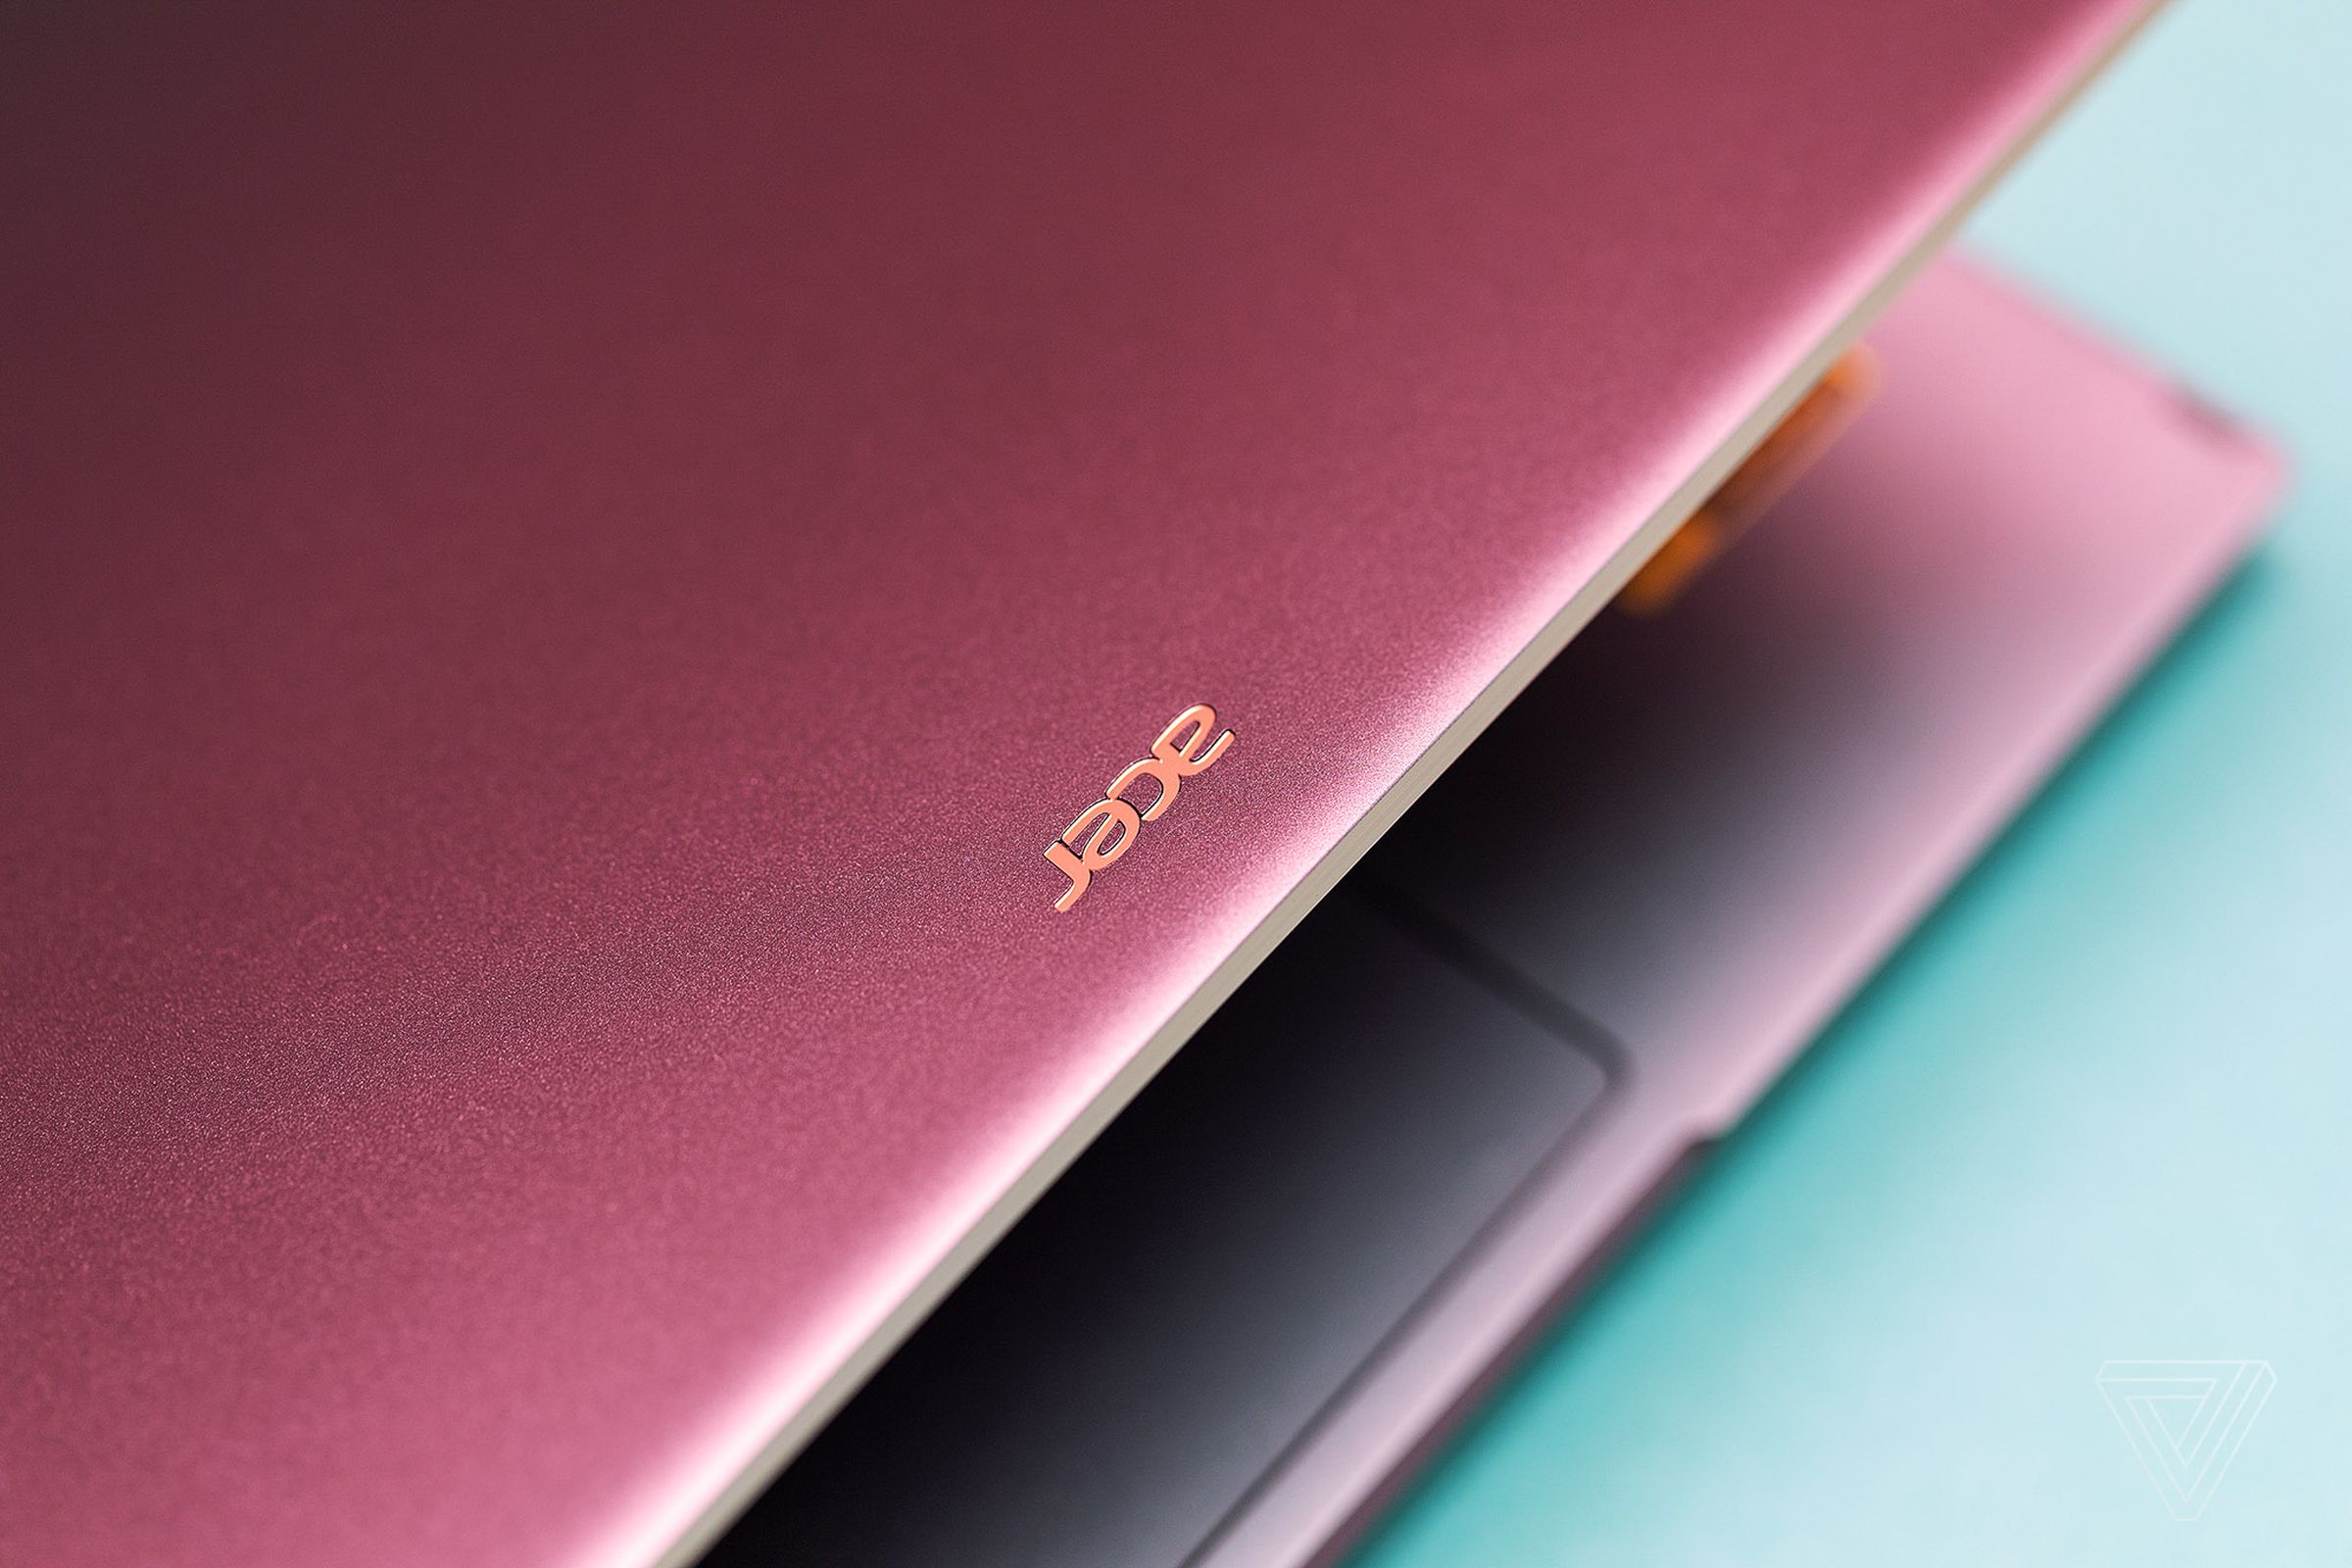 The Acer logo on the lid of the Swift 5.